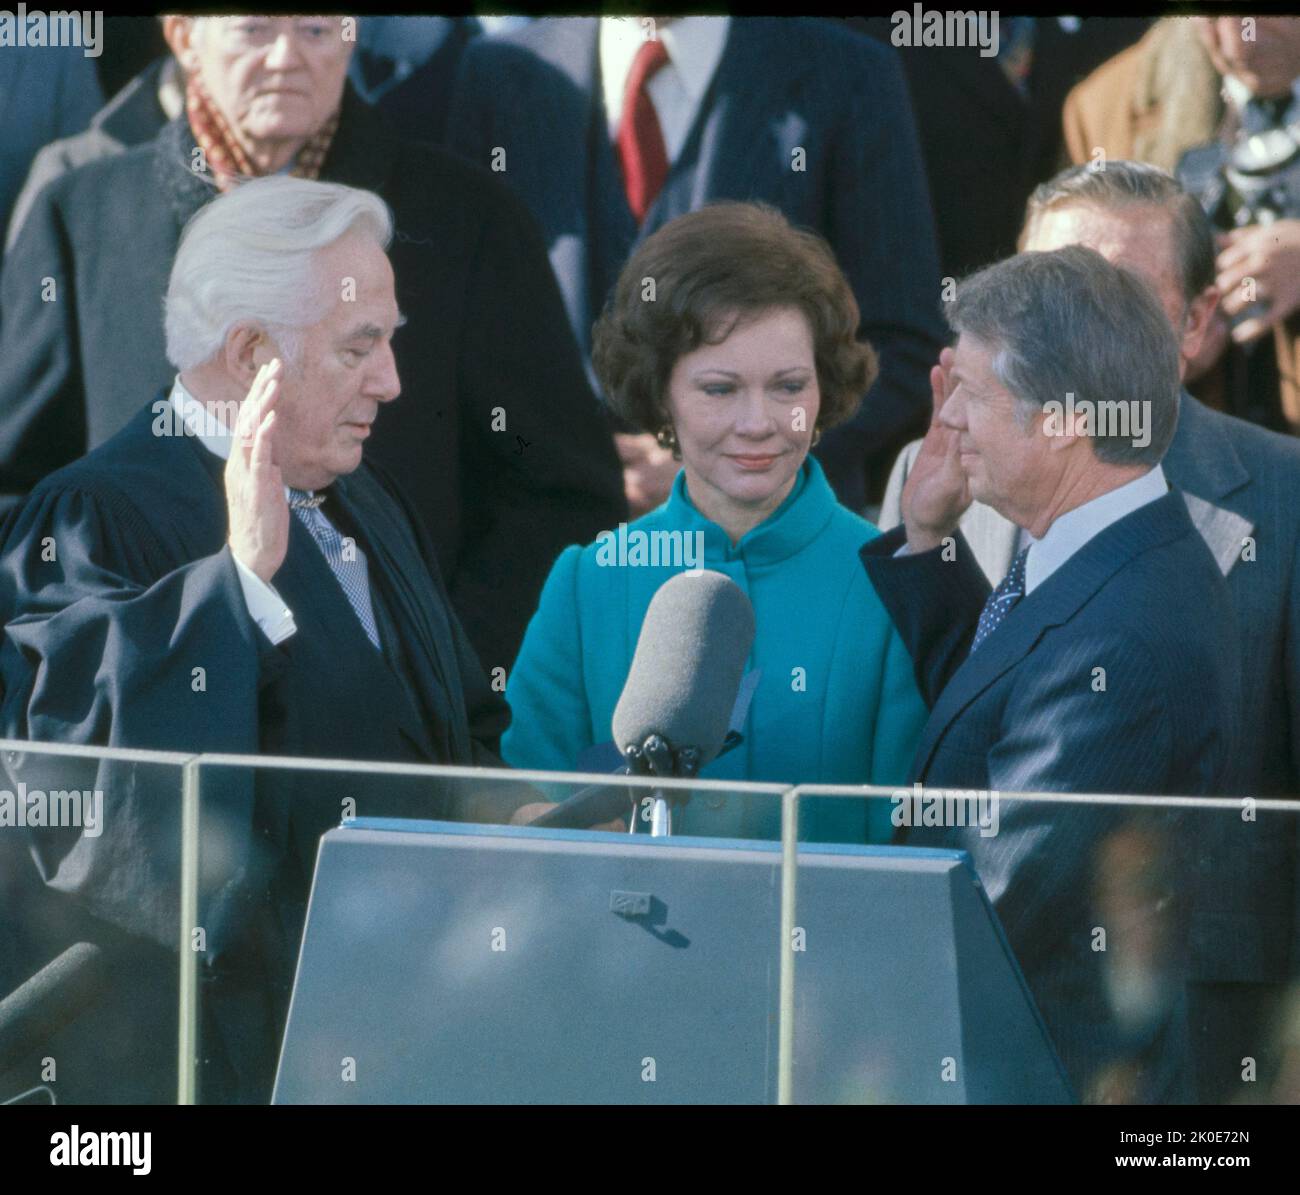 The inauguration of Jimmy Carter as the 39th president of the United States was held on Thursday, January 20, 1977, at the East Portico of the United States Capitol in Washington D.C. Chief Justice Warren E. Burger administered the presidential oath of office to Carter. Stock Photo